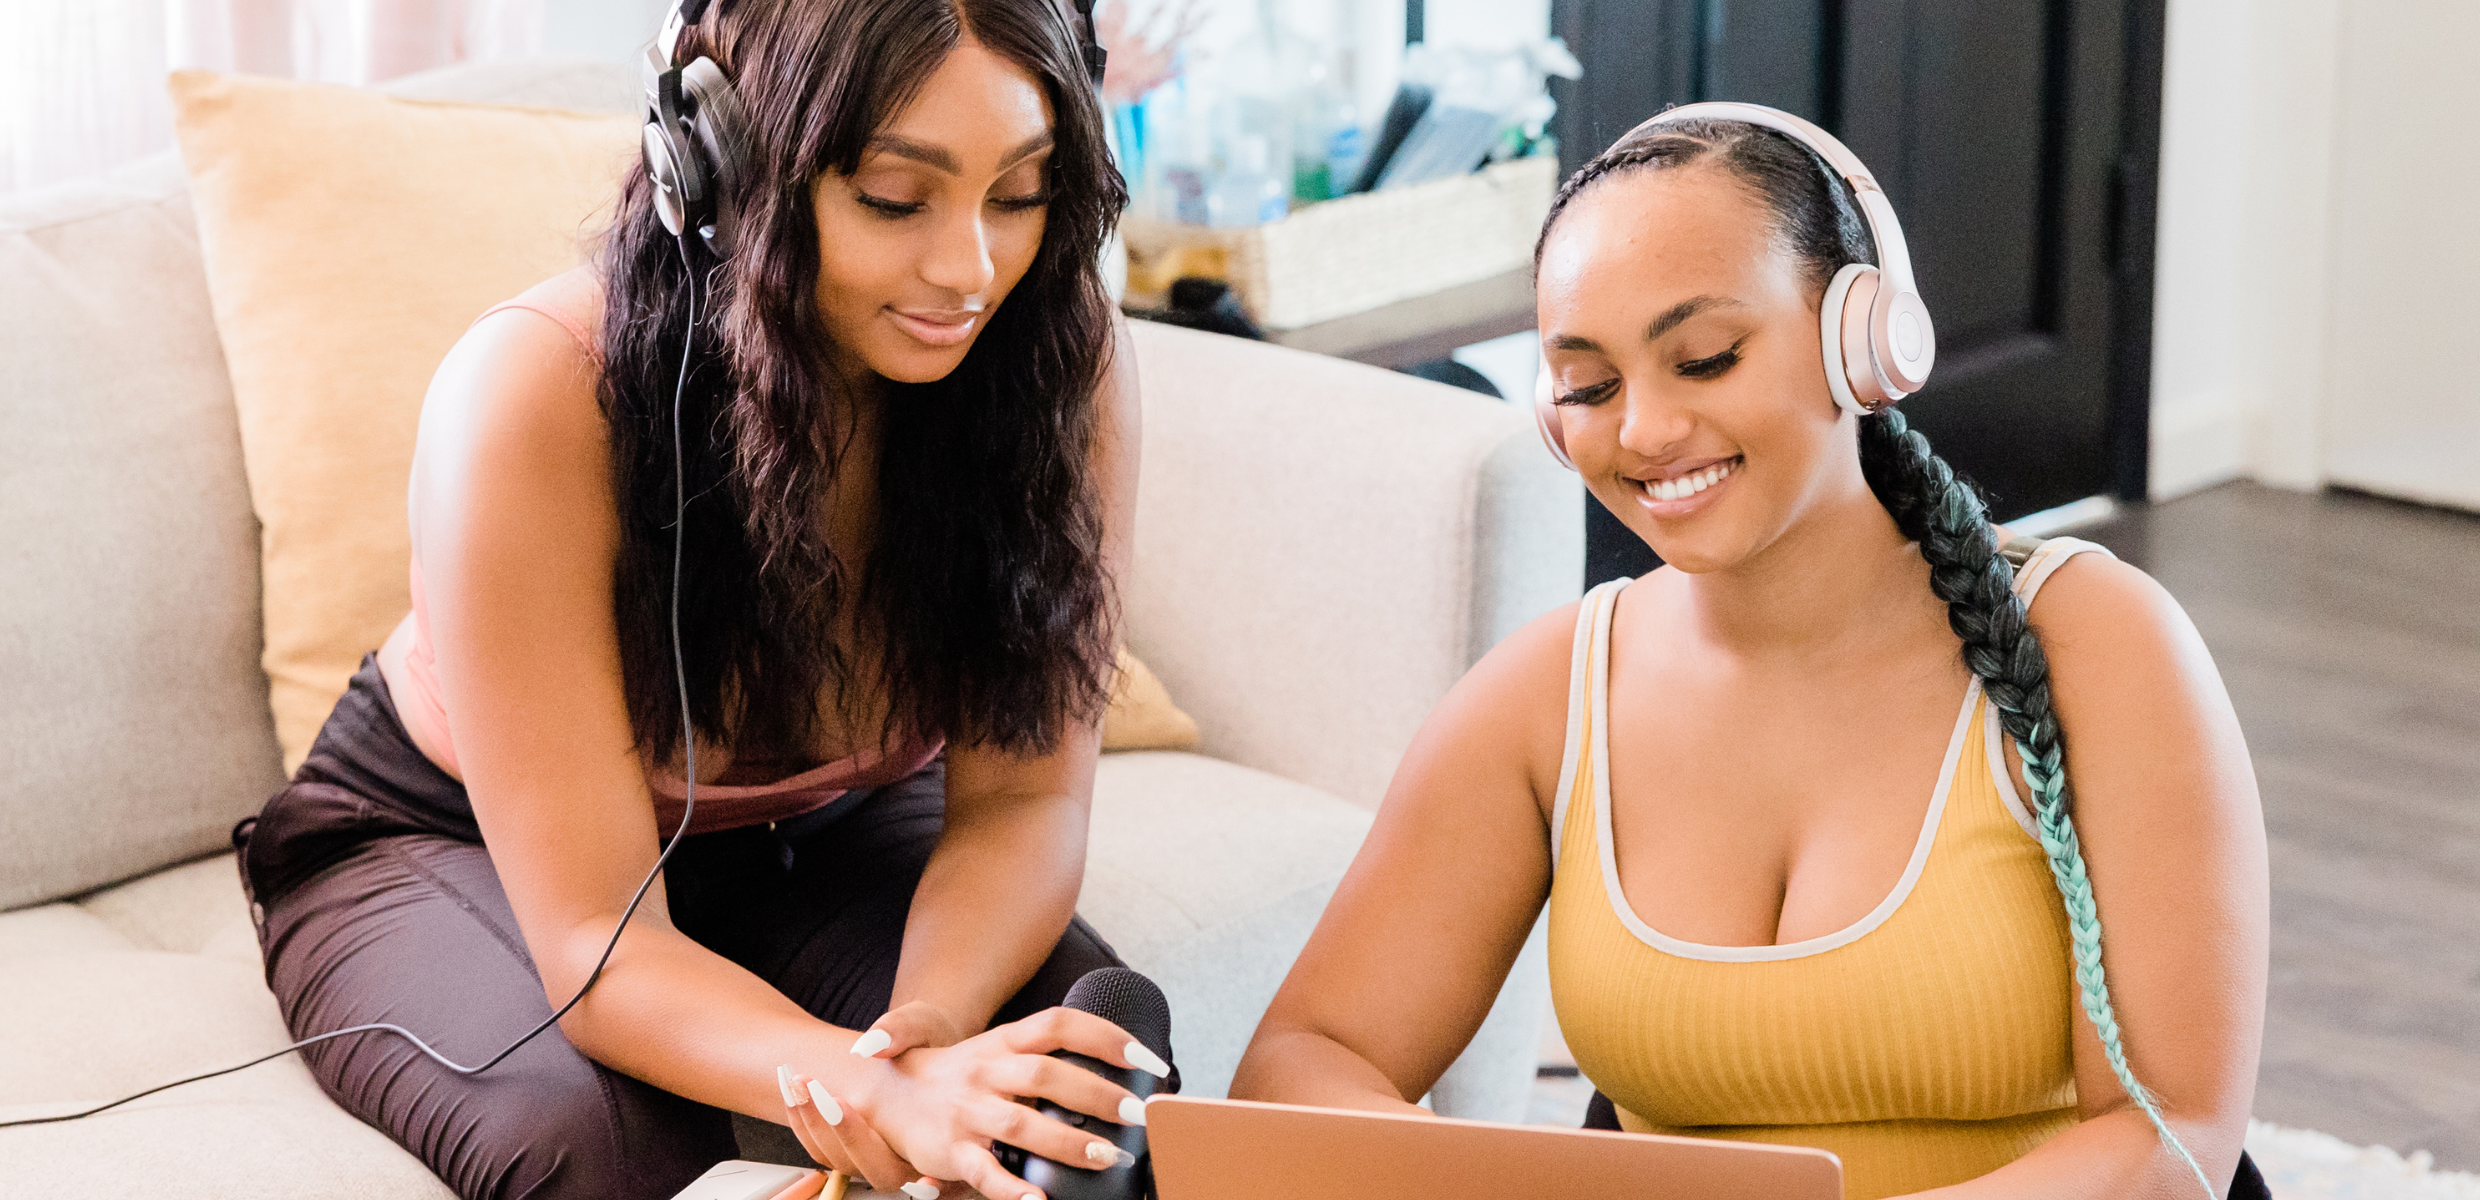 When you build your personal brand with podcasting, it's important to collaborate with people who align with your objectives to get the best results.